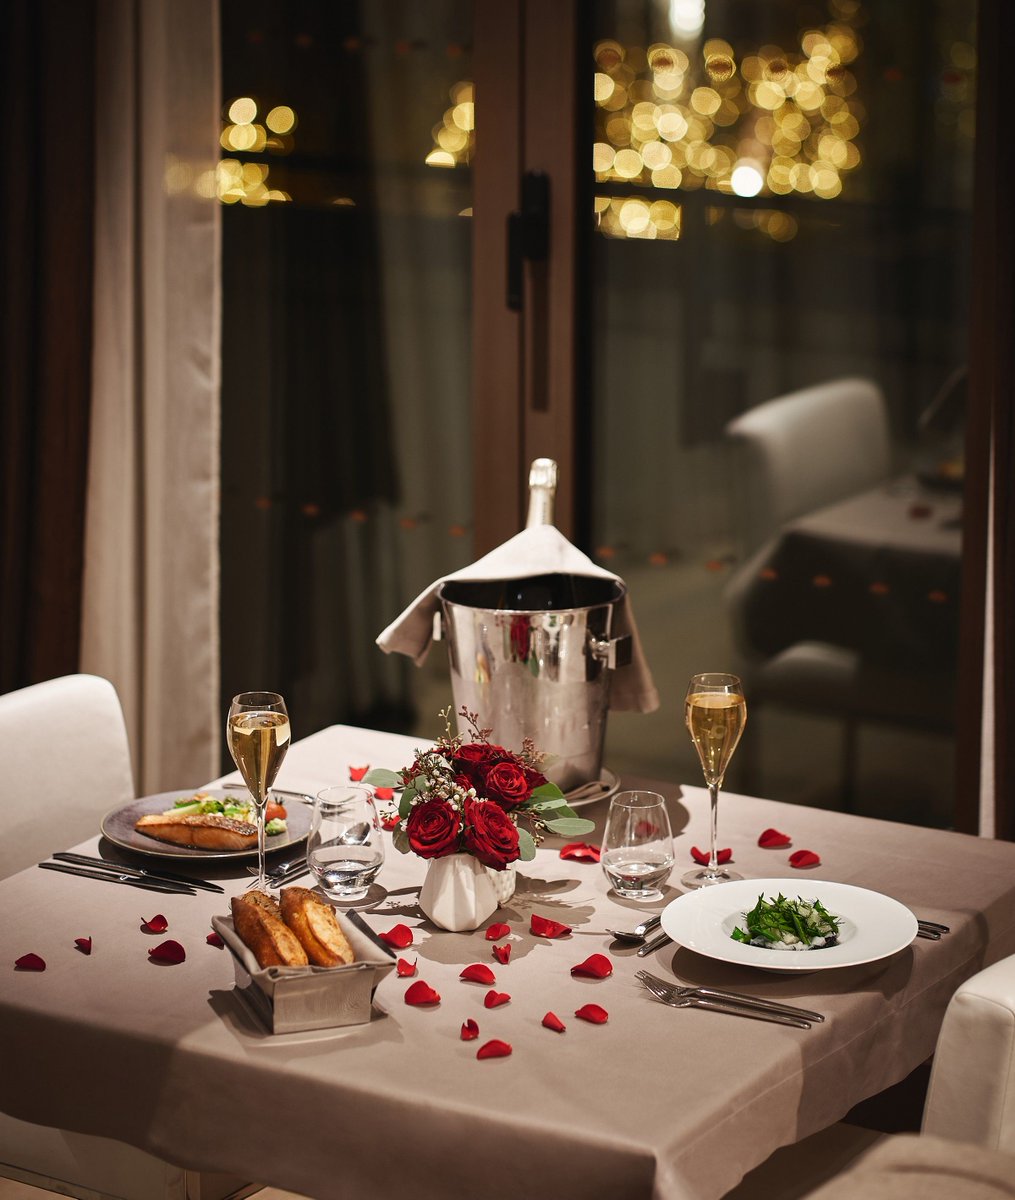 Another magic place to celebrate a #luxurious #ValentinesDay in #Paris: the #MandarinOrietnalParis with its Valentine's Day menu 🍽️🥂 by #ThierryMarx included in their #BeMyValentine offer 😍🎁❤️✨
@MO_PARIS
#JaimeParis #MakeParisYours #Romance #CityofLove #Parisjetaime